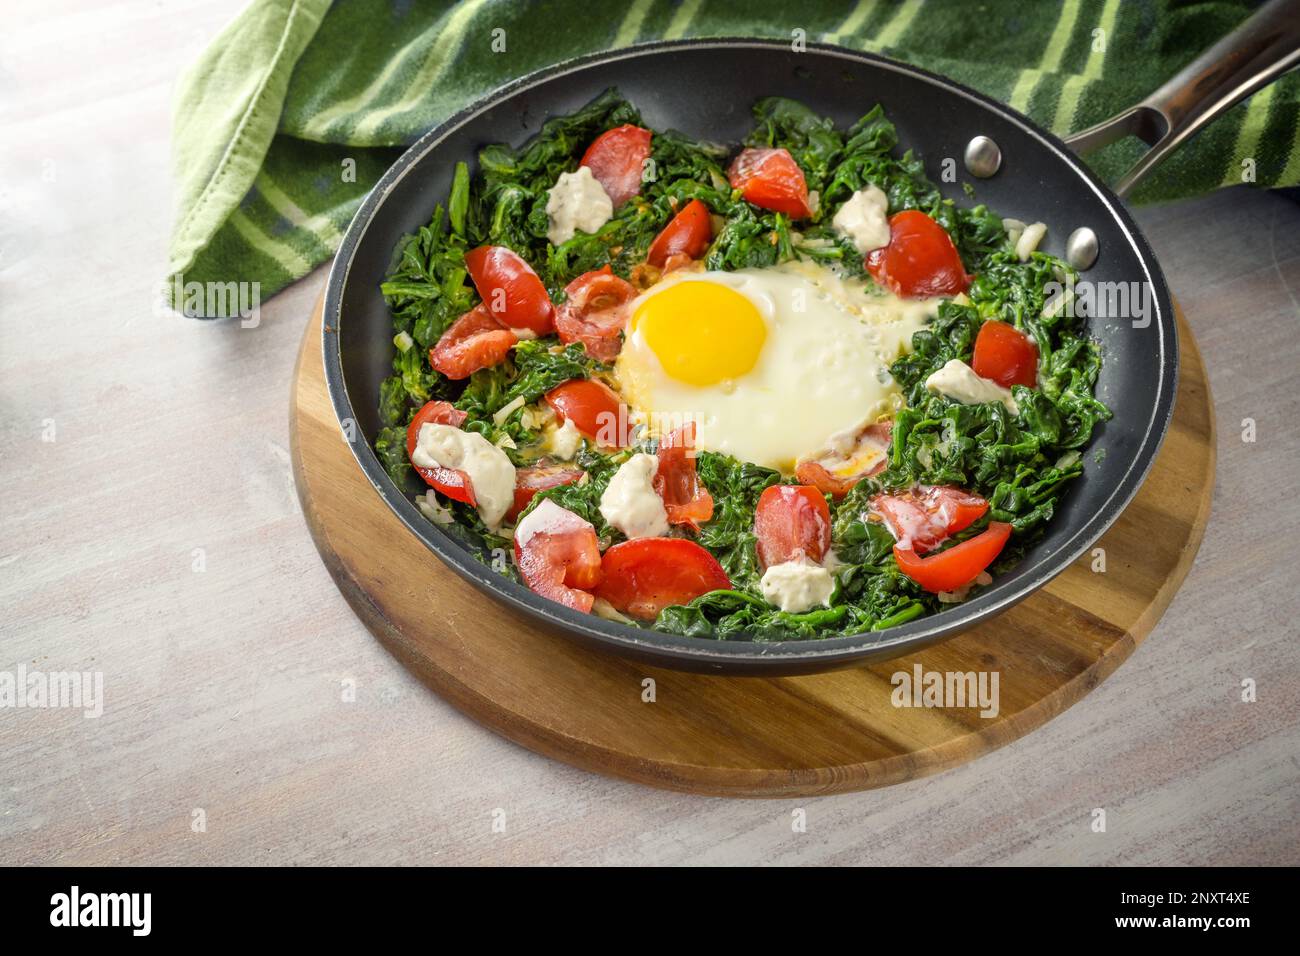 Fried egg, spinach and tomatoes with some yoghurt blobs in a frying pan on a wooden cutting board and a green kitchen towel, healthy meal, copy space, Stock Photo